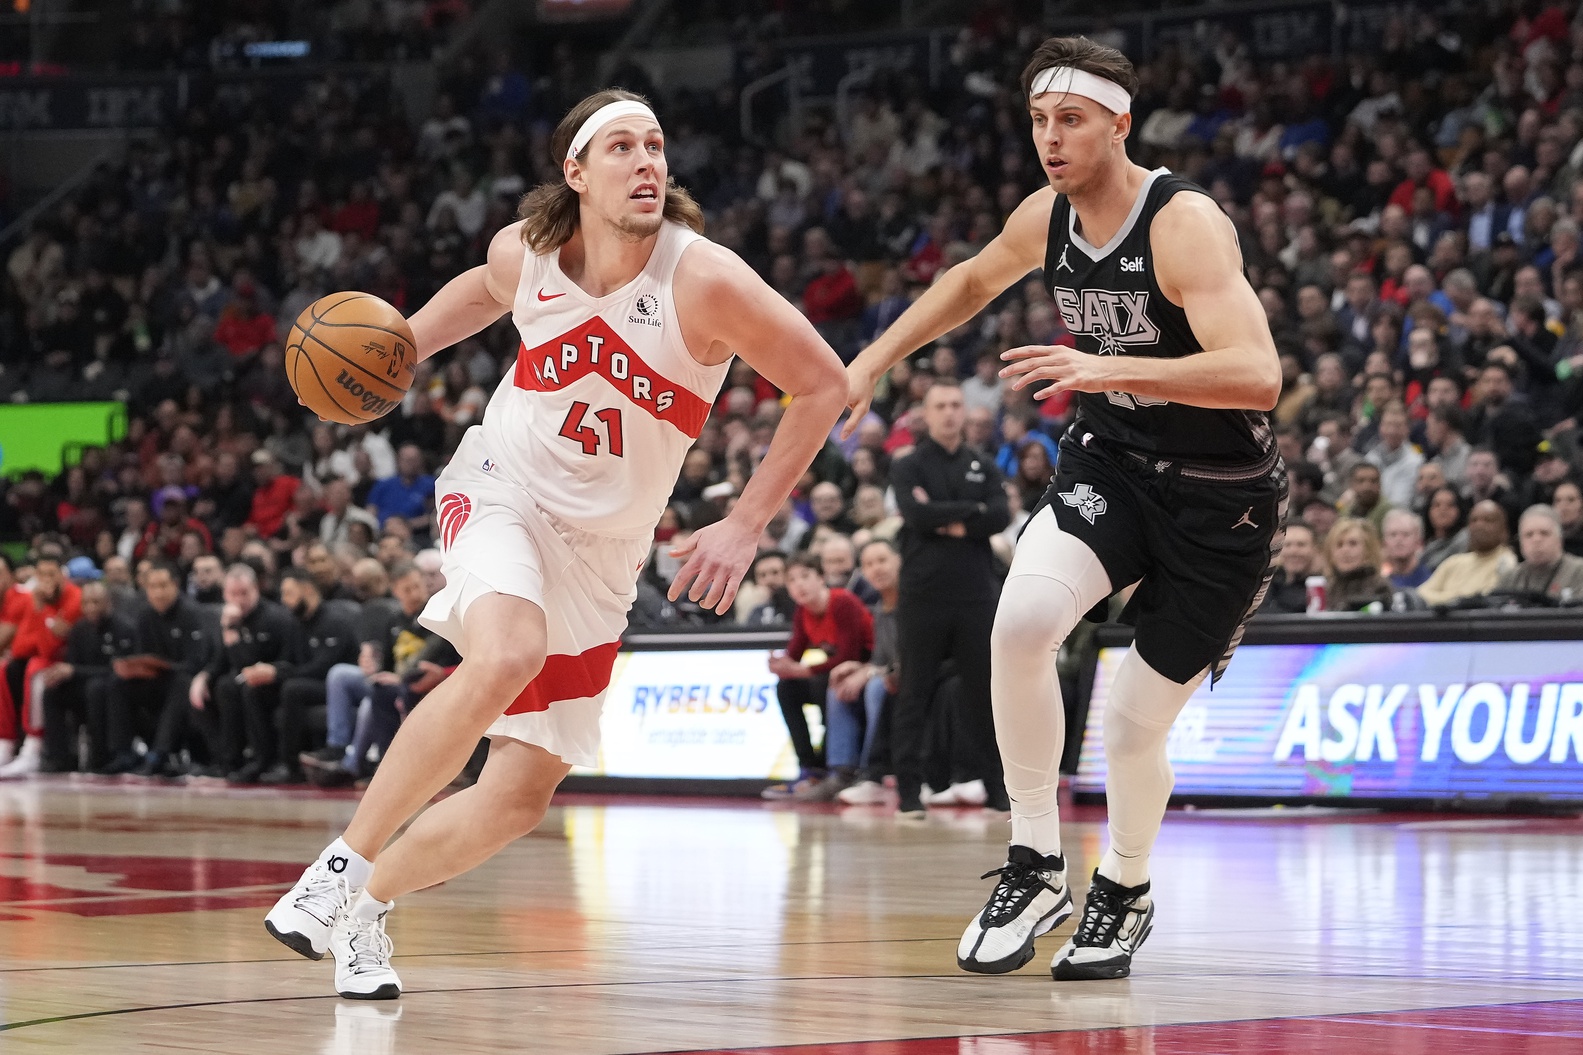 Feb 12, 2024; Toronto, Ontario, CAN; Toronto Raptors forward Kelly Olynyk (41) drives to the net against San Antonio Spurs forward Zach Collins (23) during the first half at Scotiabank Arena. Mandatory Credit: John E. Sokolowski-USA TODAY Sports